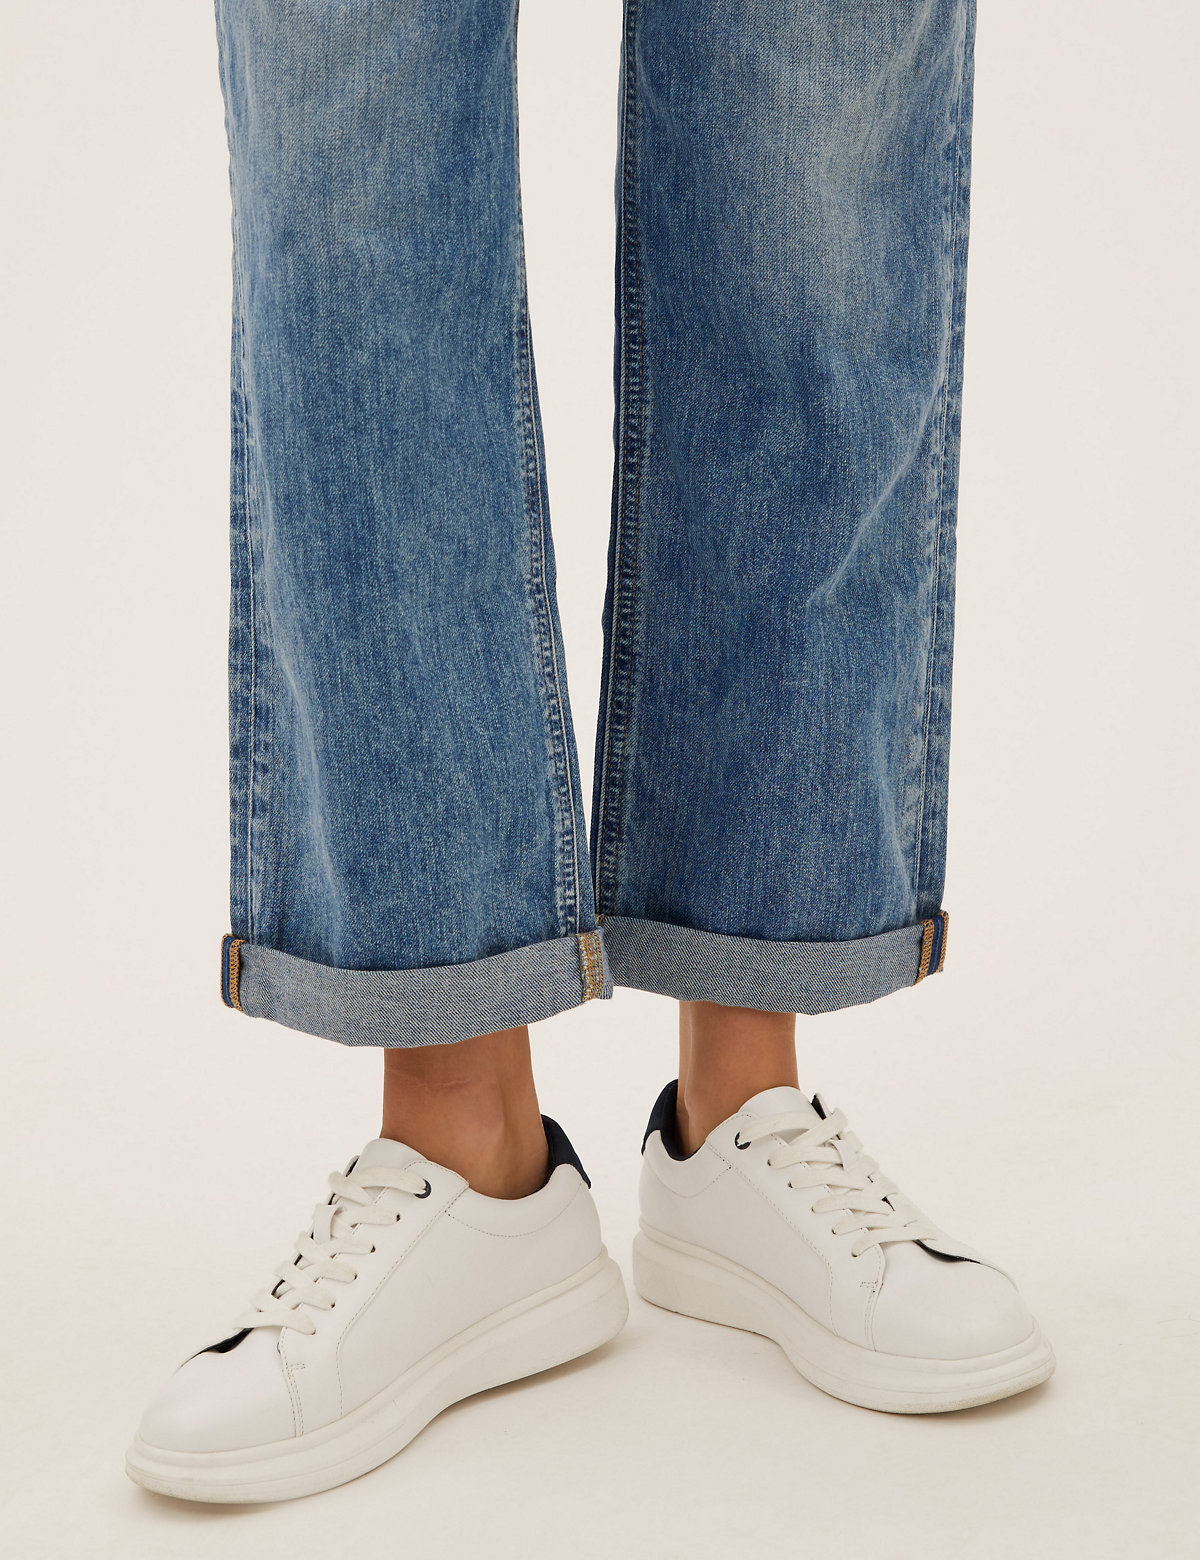 Boyfriend Jeans With Recycled Cotton